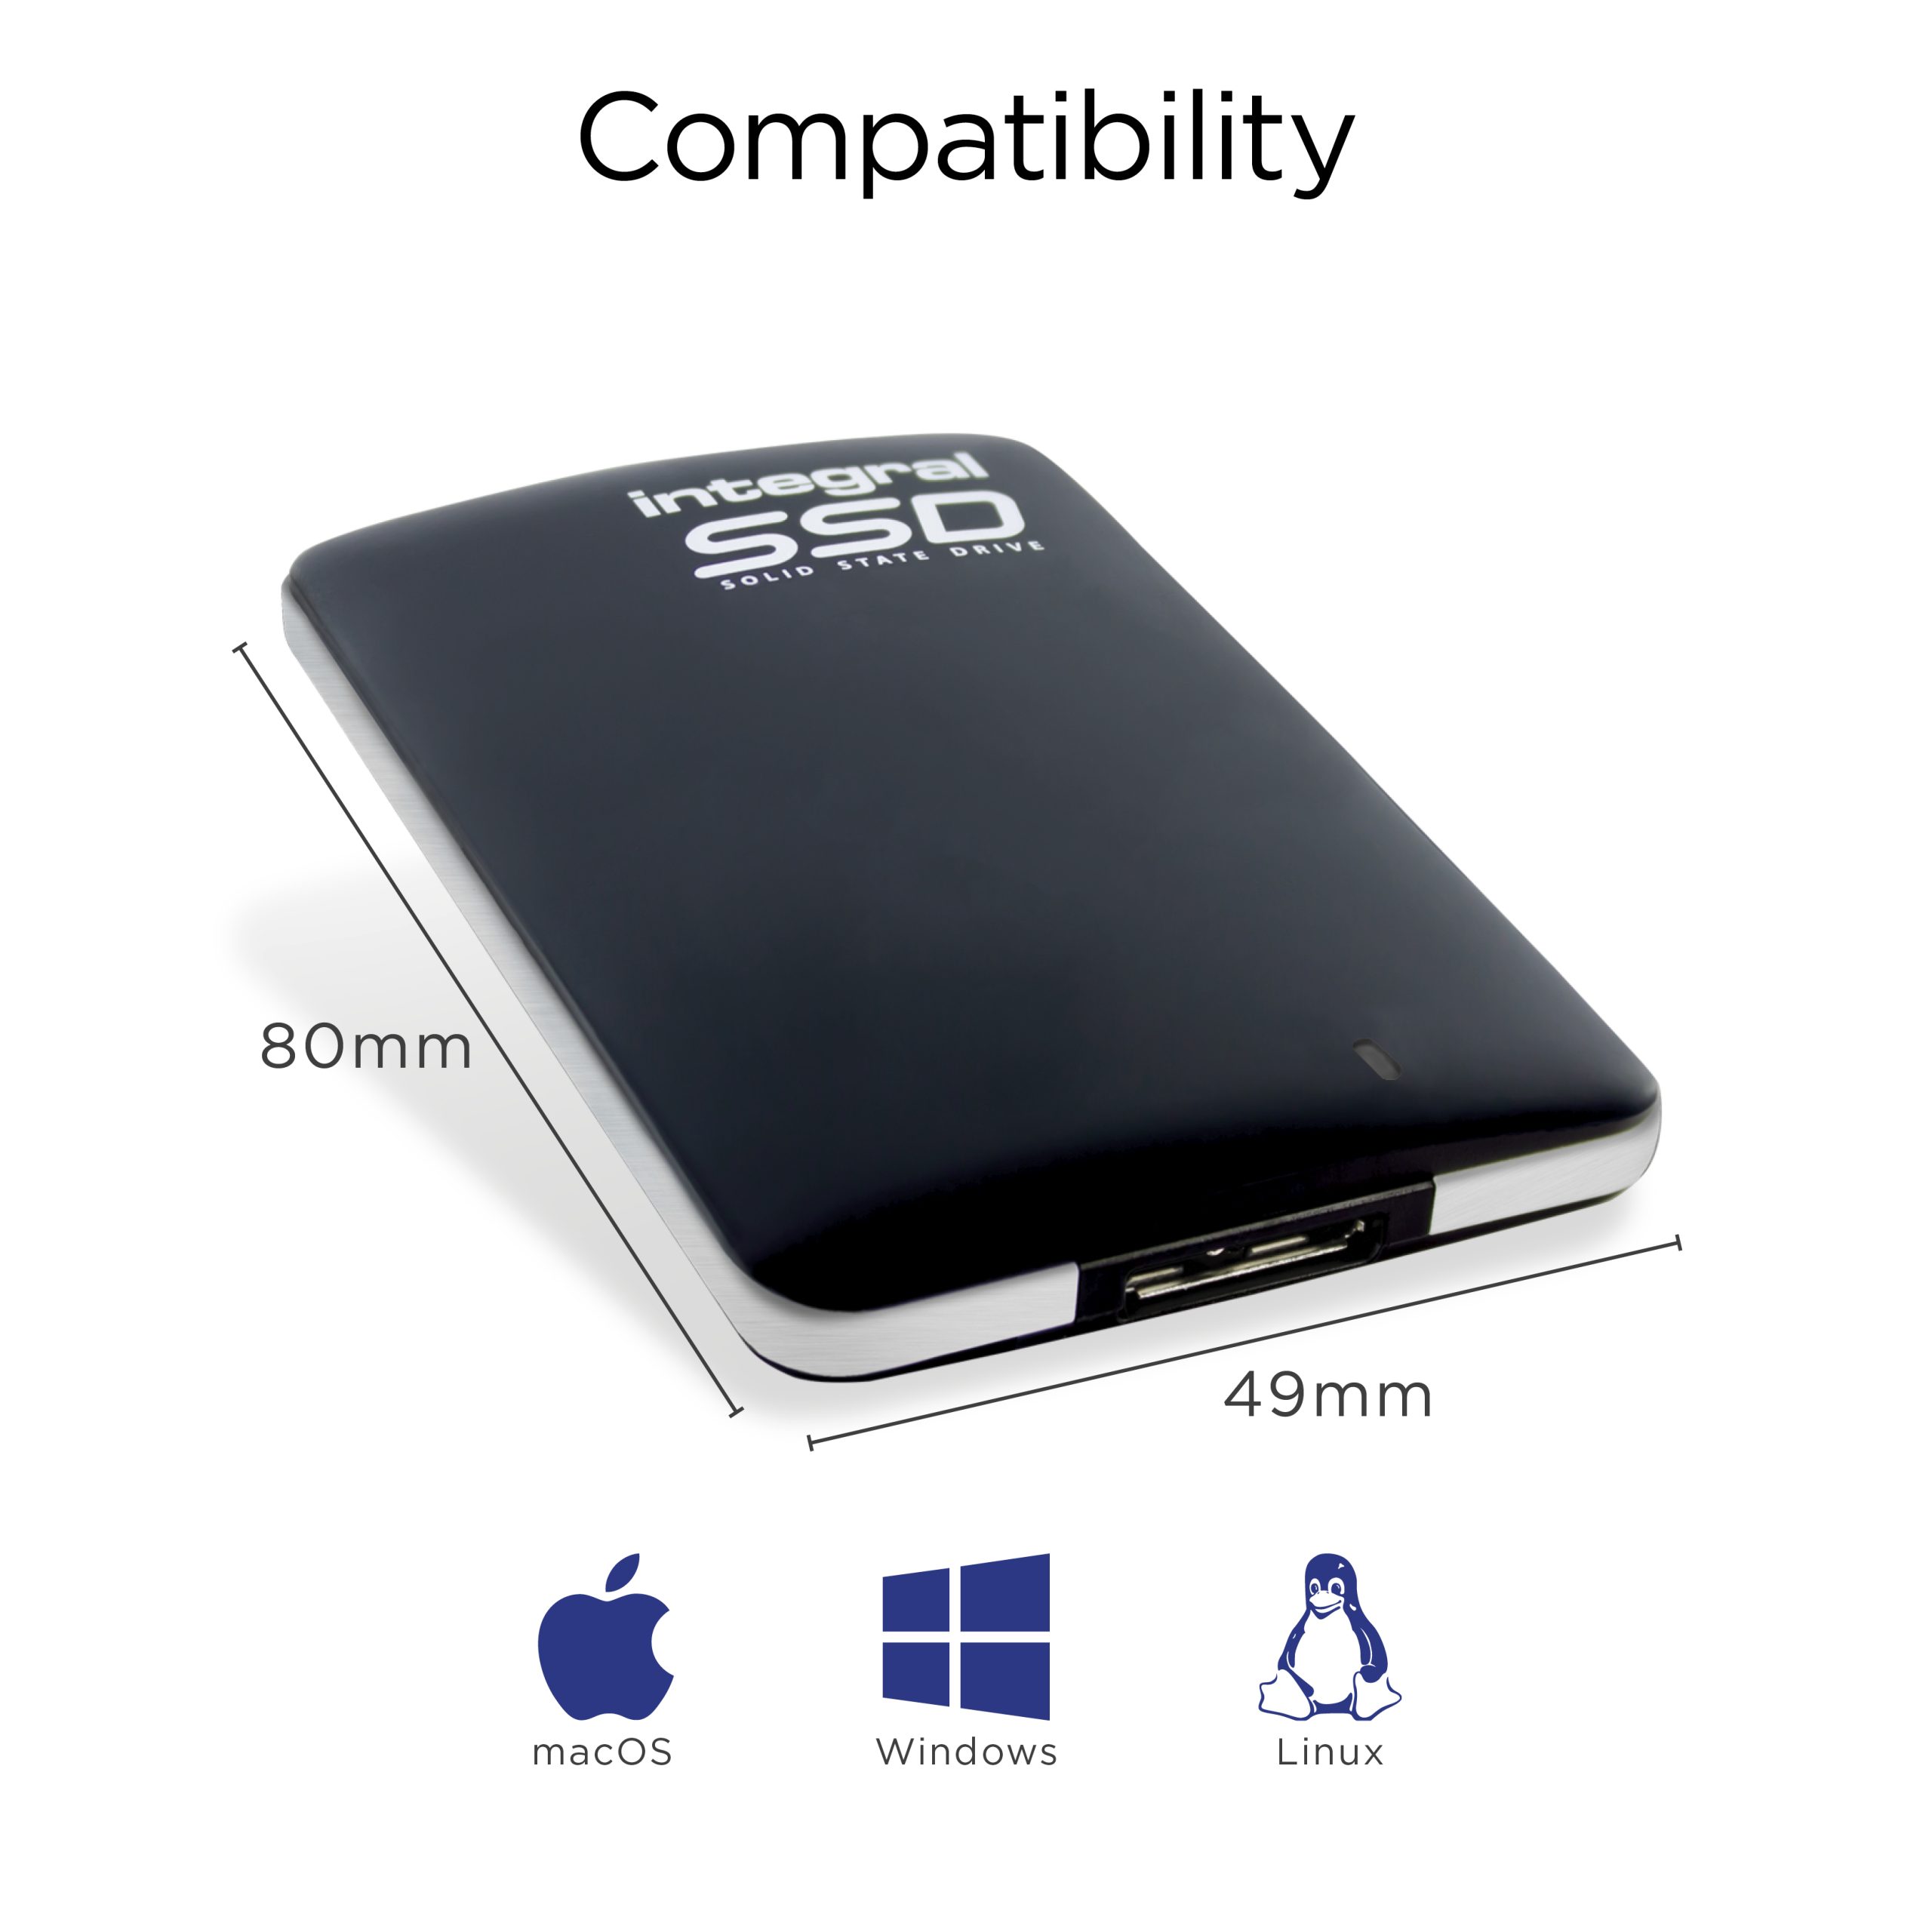 USB 3.0 Portable Solid State Drive Compatibility